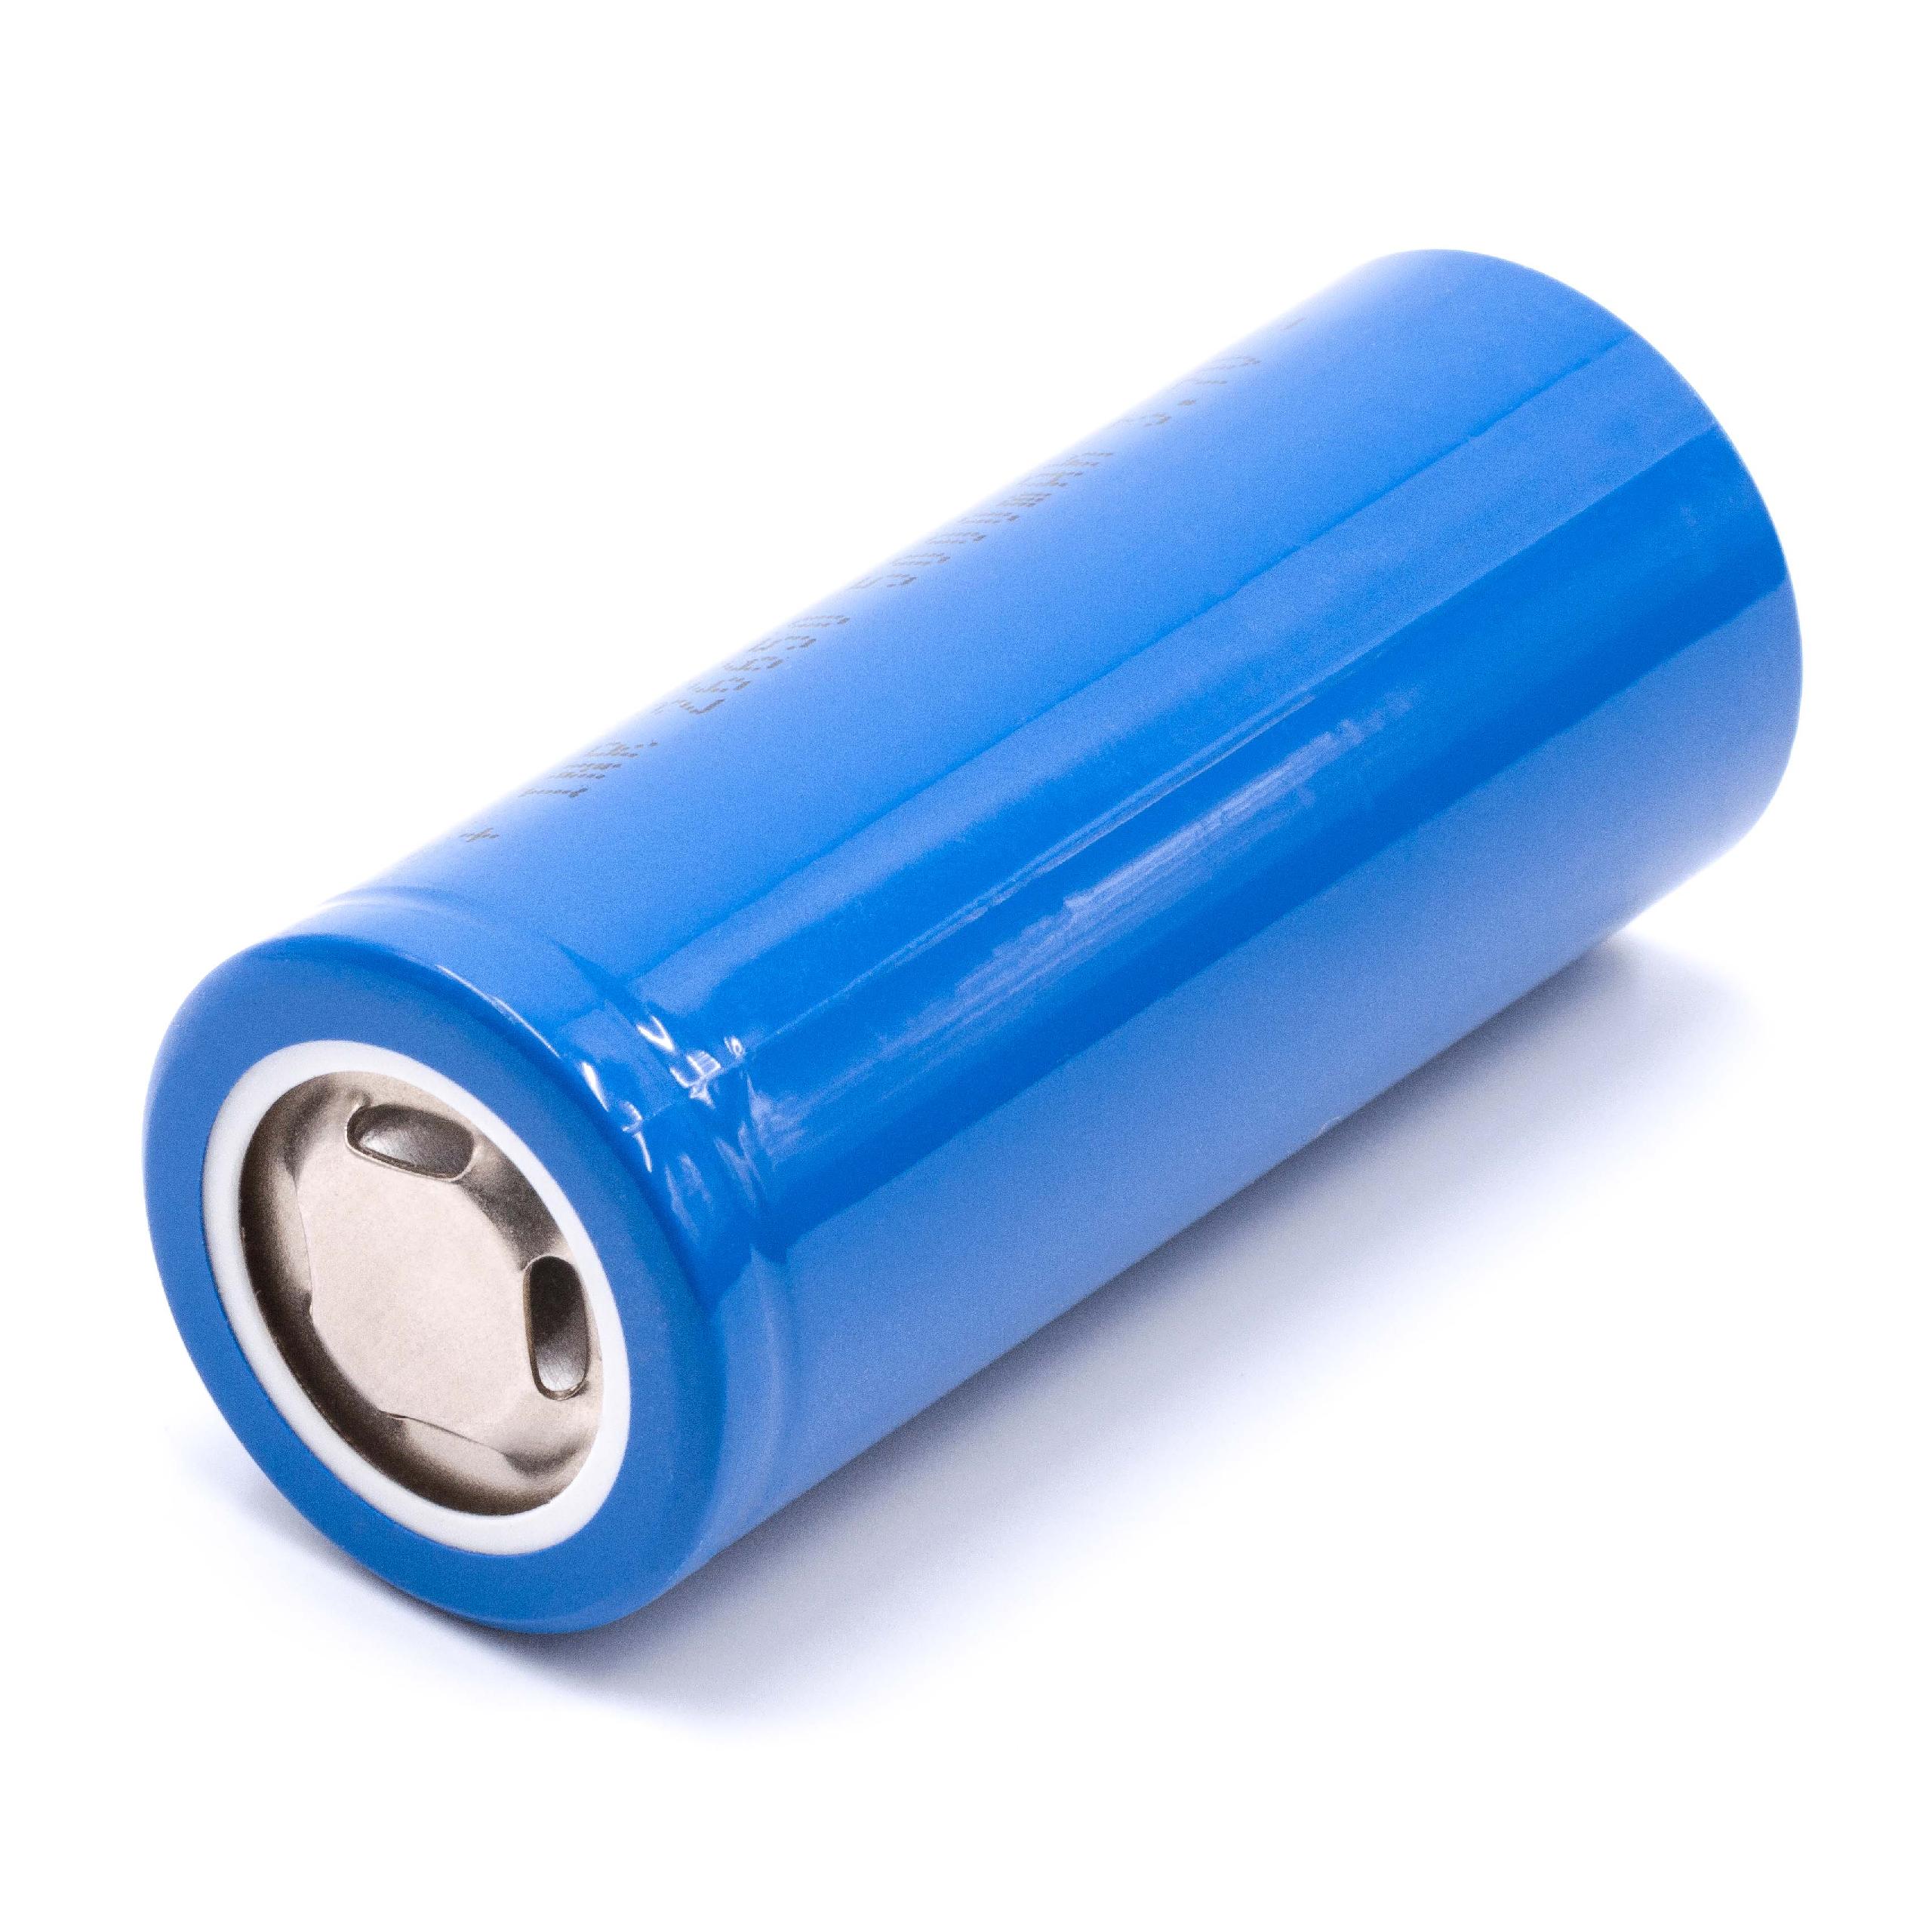 Raw Battery Cell replaces INR26650-50A for Rechargeable Batteries - 5000mAh 3.6V Li-Ion